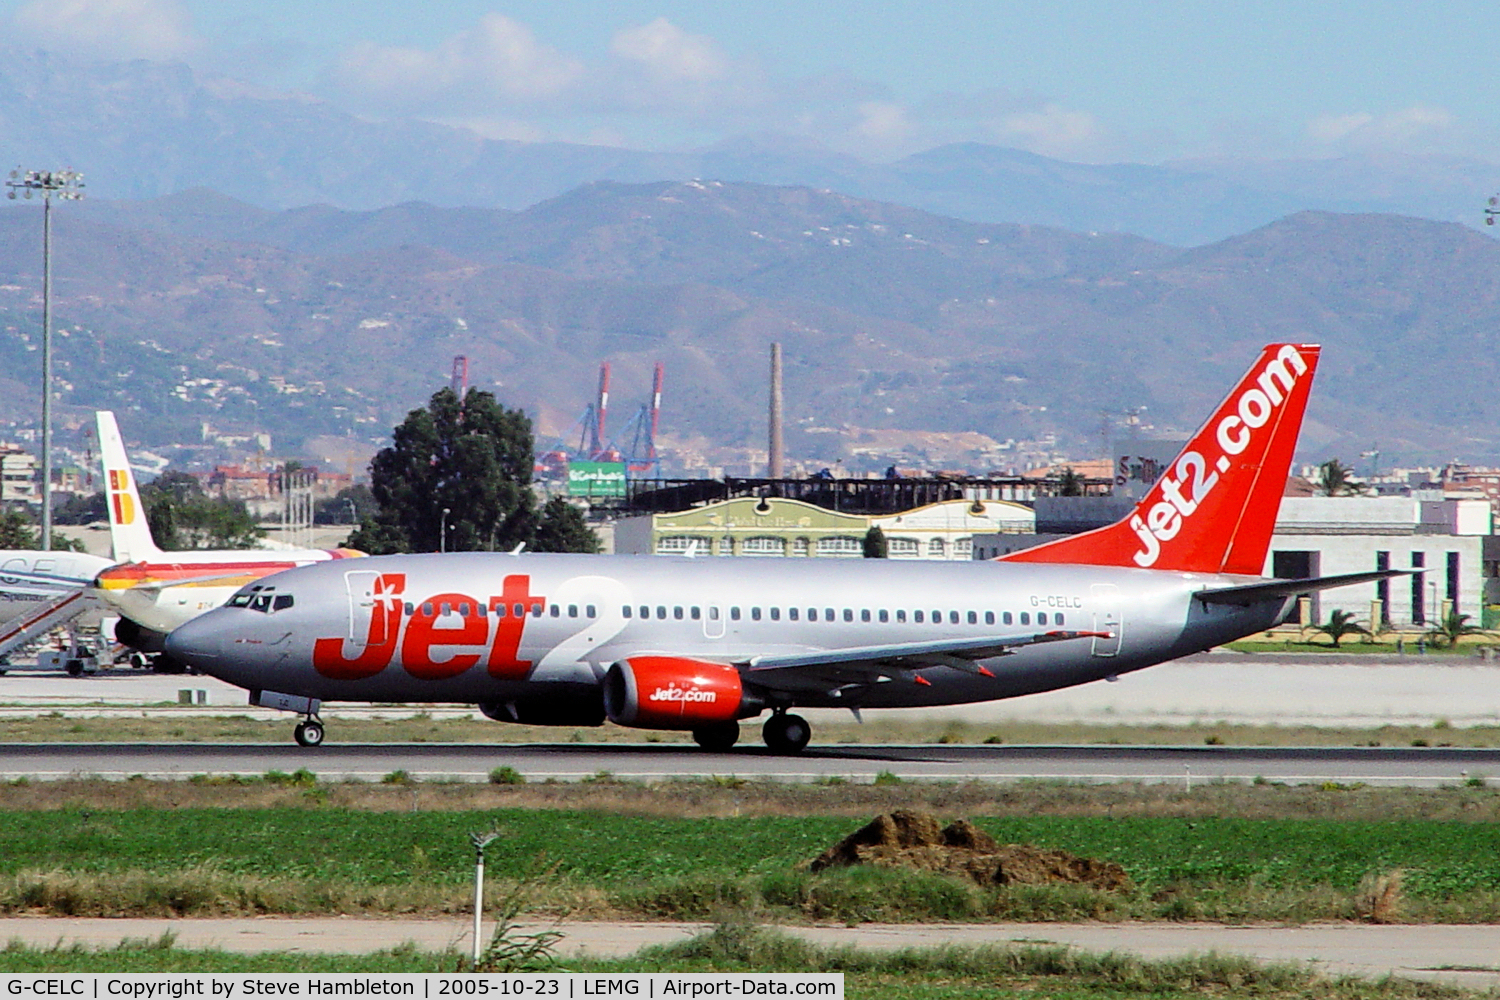 G-CELC, 1987 Boeing 737-33A C/N 23831, Taxiing out for take off at Malaga Pablo Picasso Airport